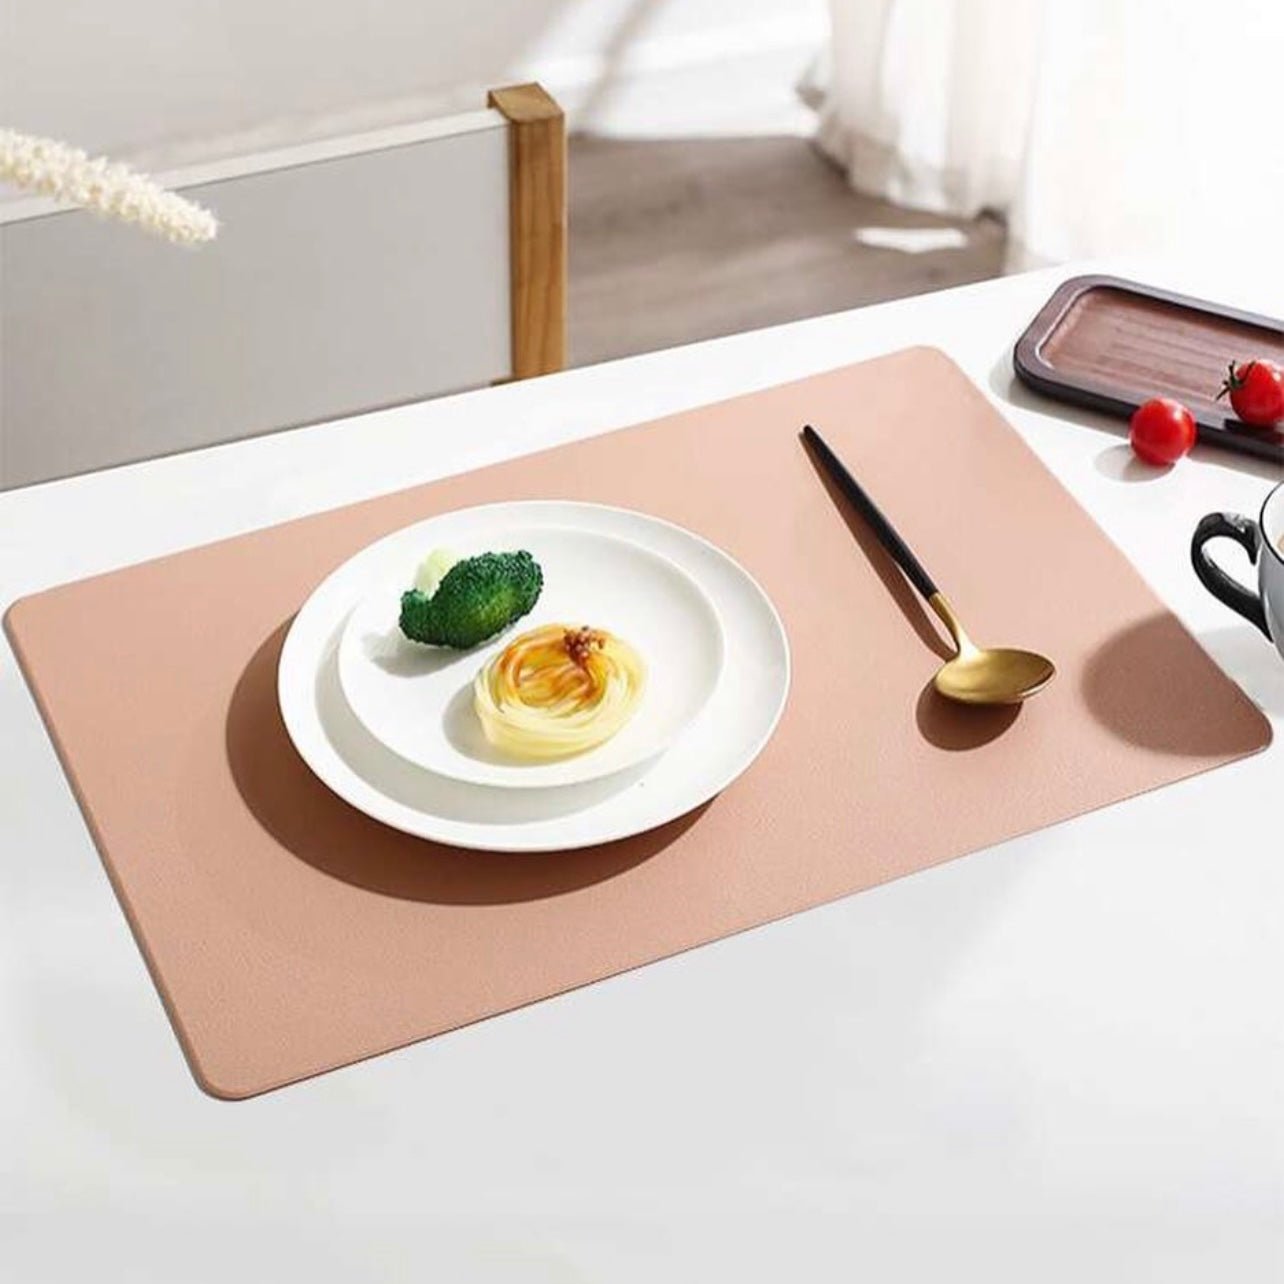 Stockholm Placemat - Buy Placemats Online at FRANKY'S